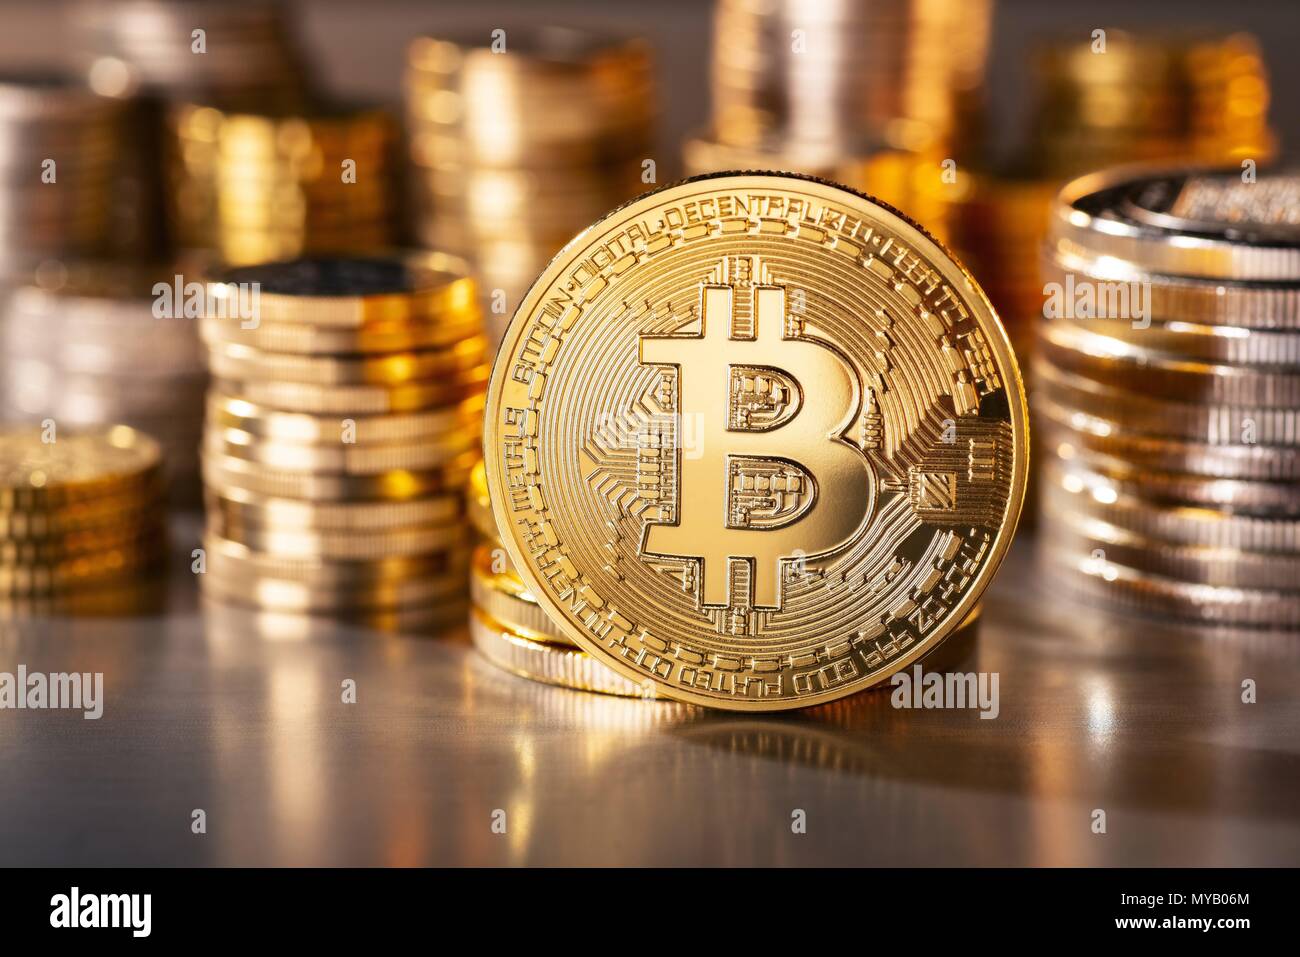 Coin of the crypto-currency Bitcoin with several stacks of coins in the background | usage worldwide Stock Photo